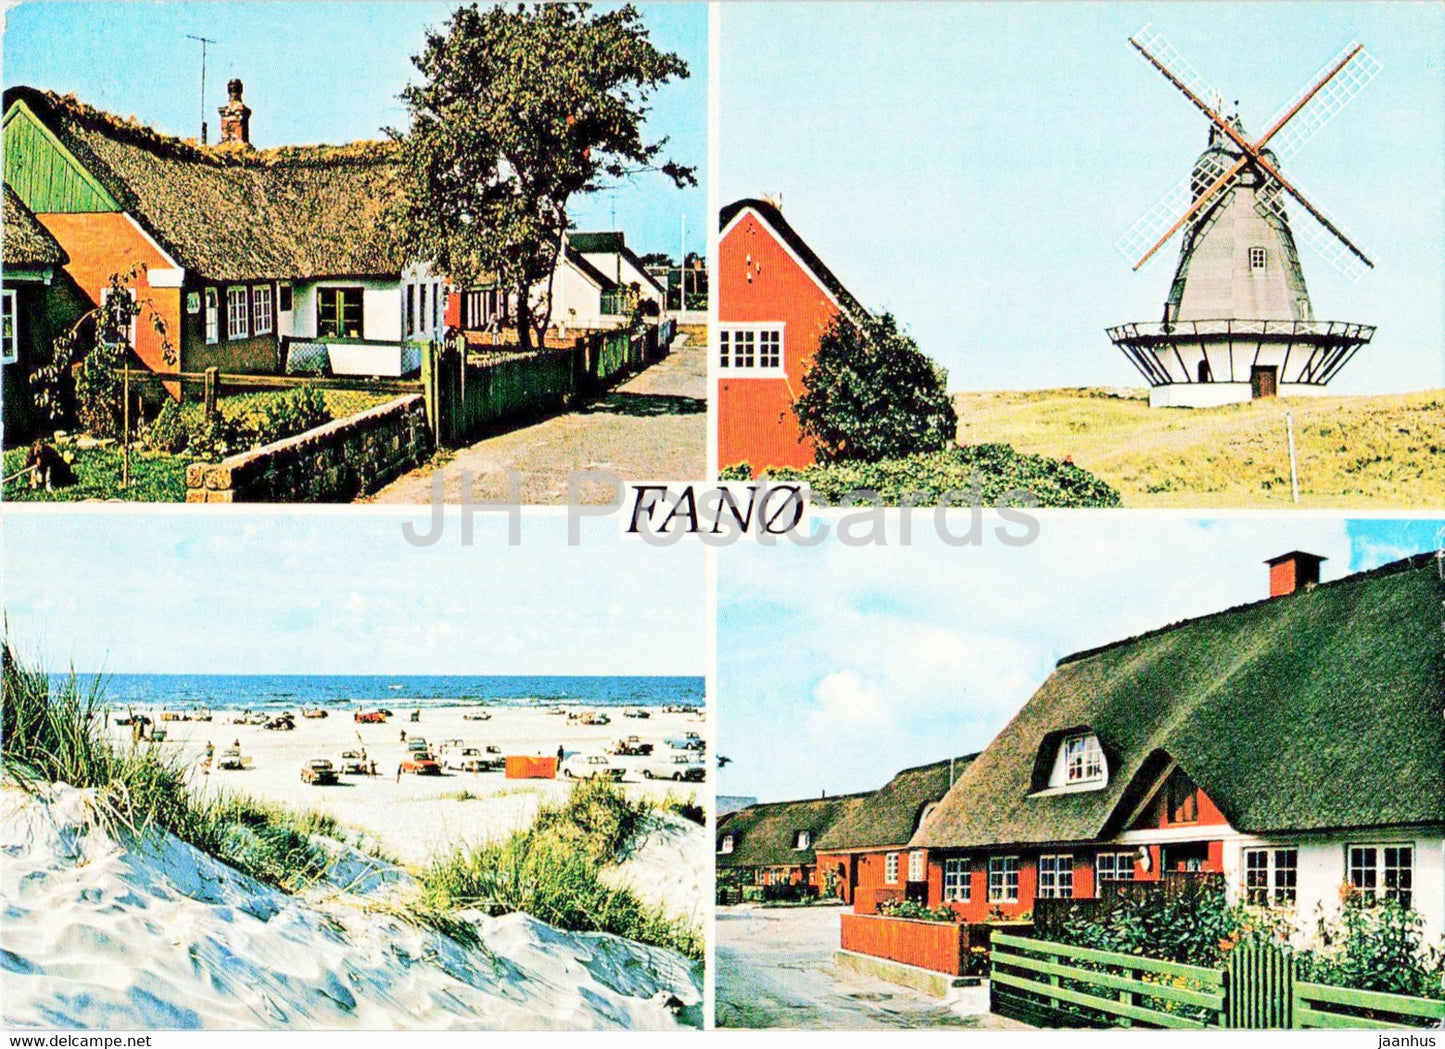 Fano - windmill - town views - beach - multiview - 1980 - Denmark - used - JH Postcards